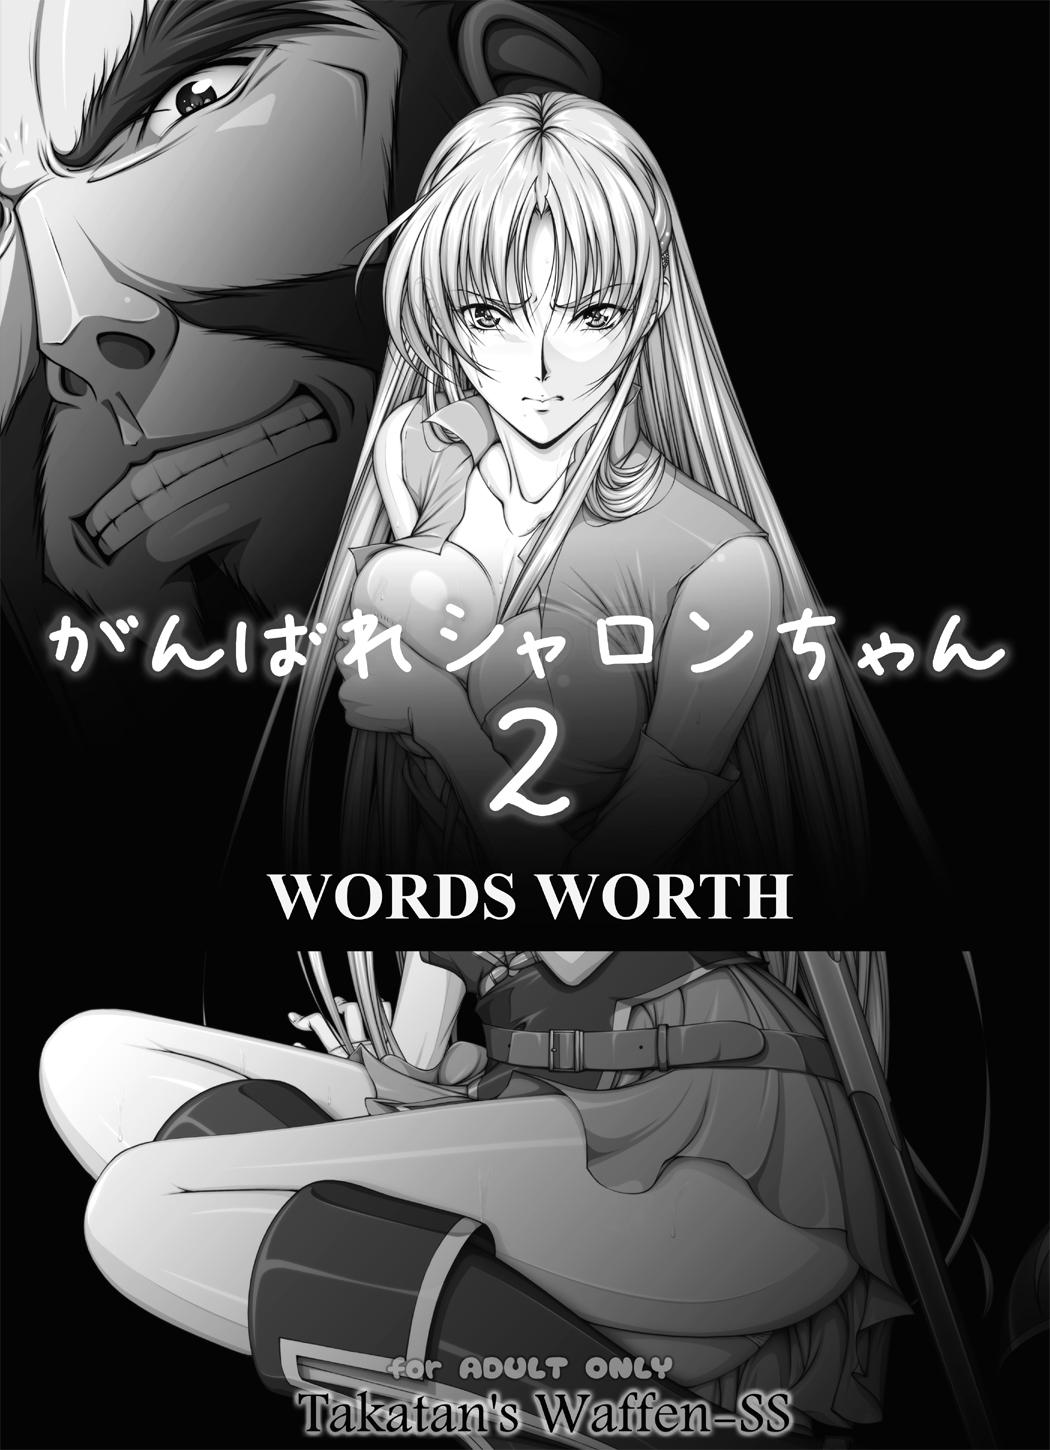 Public [Takatan's Waffen-SS] Fight, Sharon! 2 [Deluxe Edition] (Words Worth) +omake - Words worth Young - Page 8